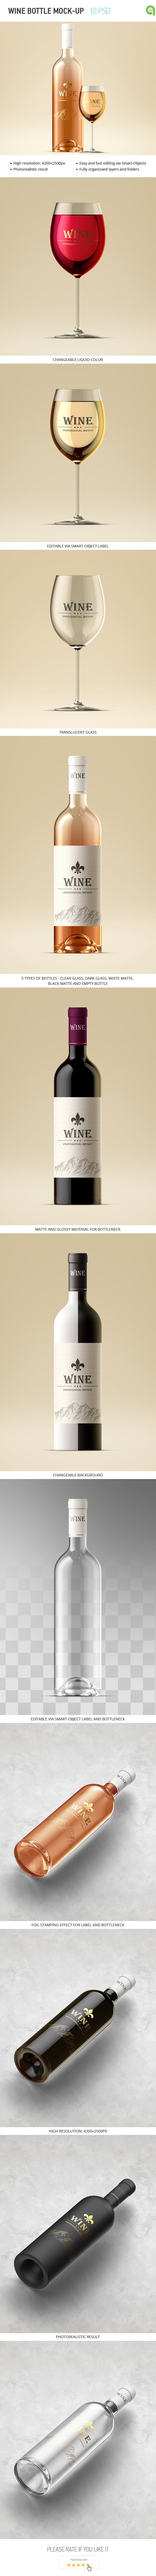 Wine Bottle and Glass Mock-up